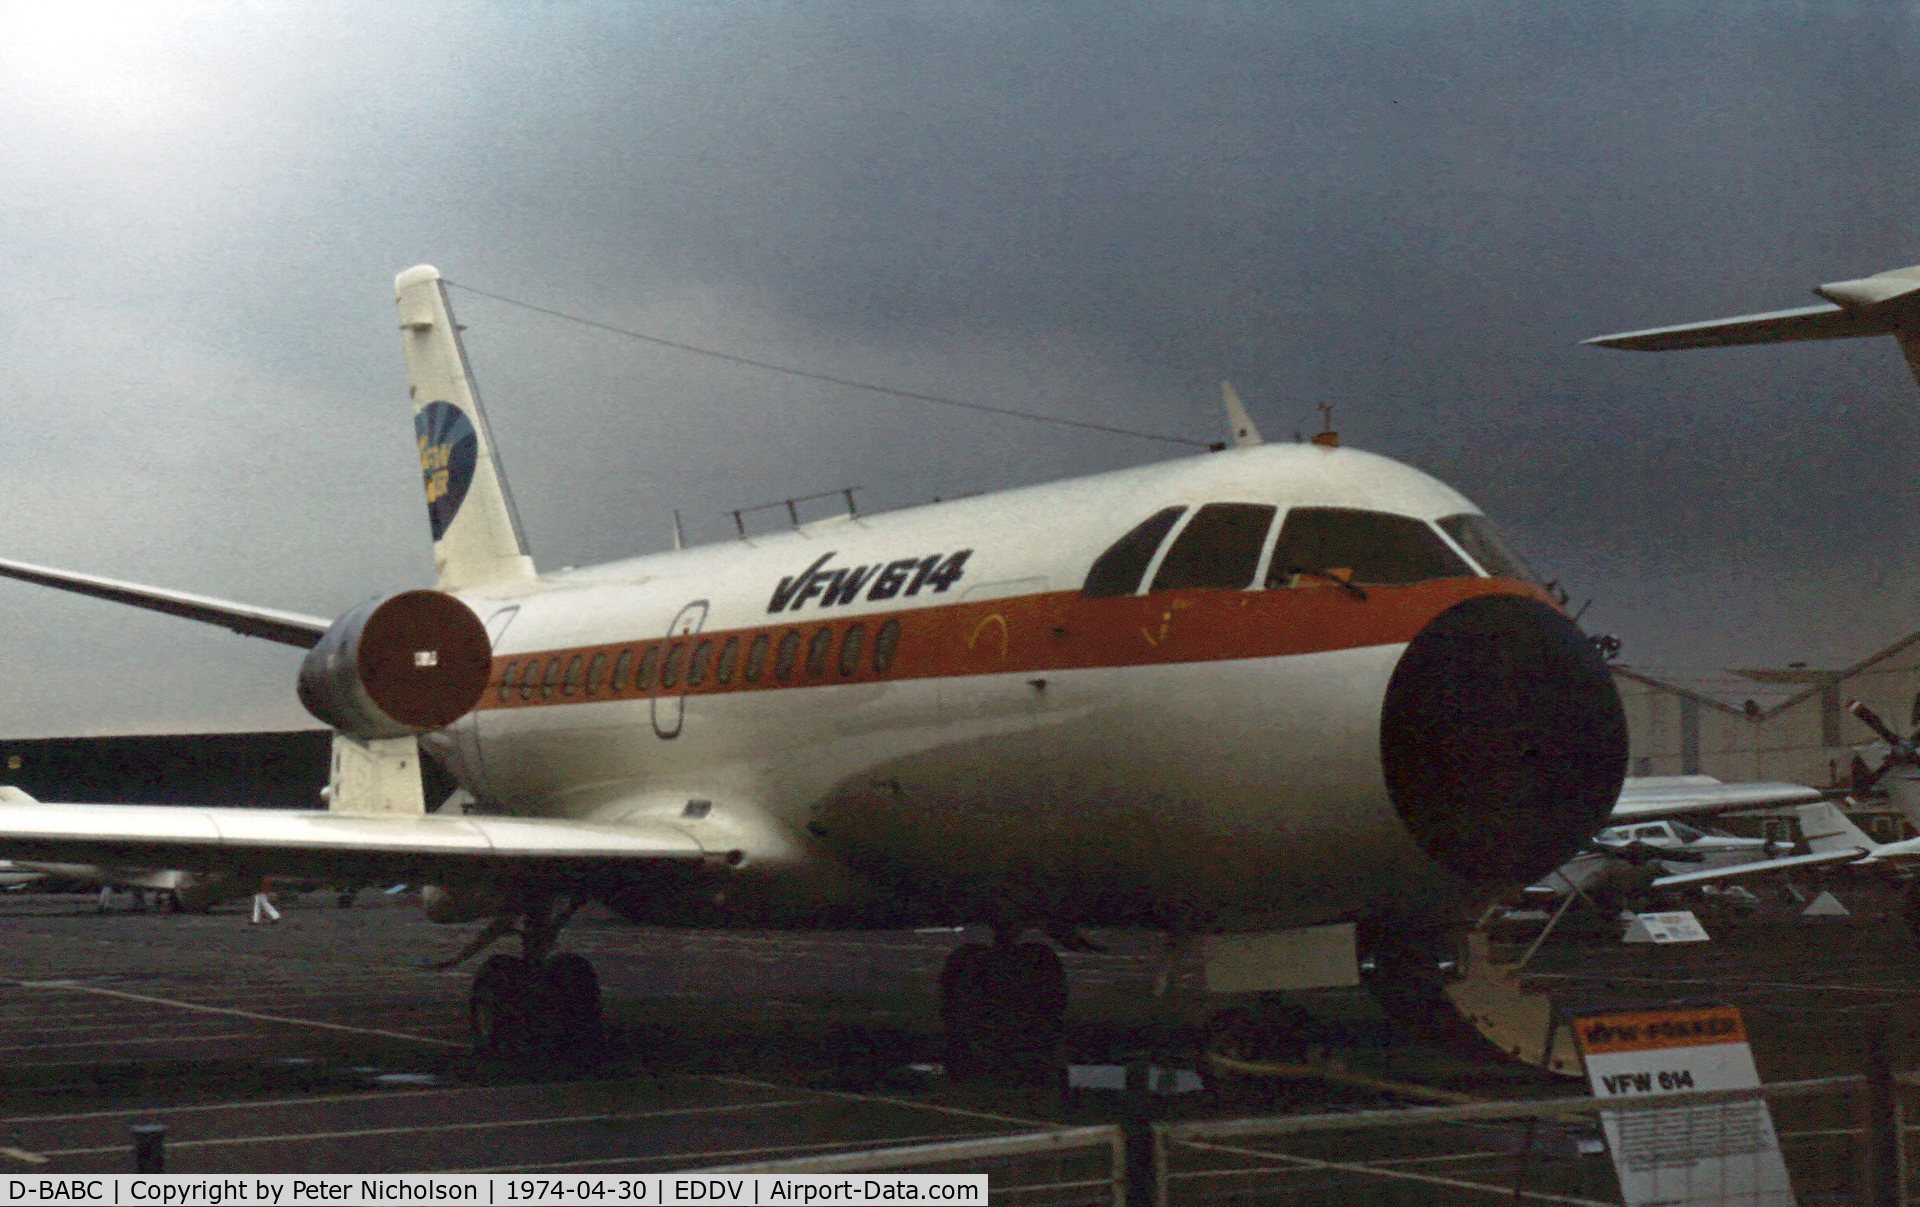 D-BABC, 1972 VFW-Fokker VFW-614 C/N G03, VFW-614 number three on display at the 1974 Hannover Airshow.